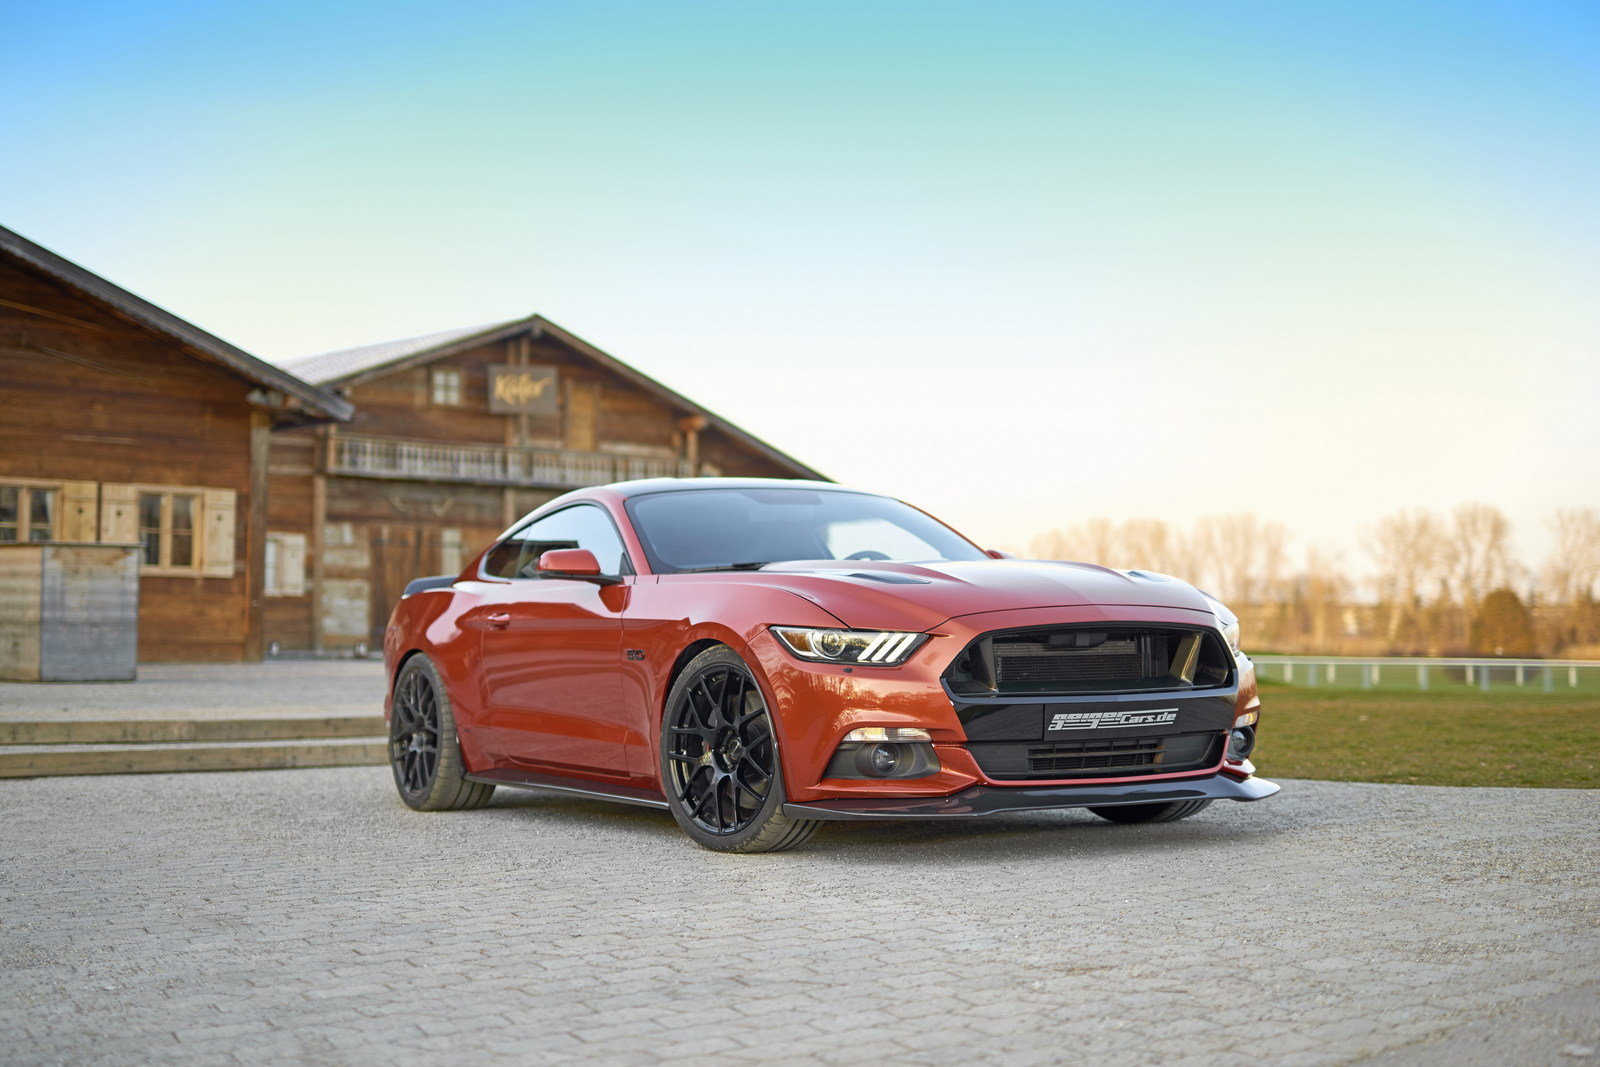 2016 Ford Mustang GT 820 By Geiger Cars - Picture 671407 | car review ...